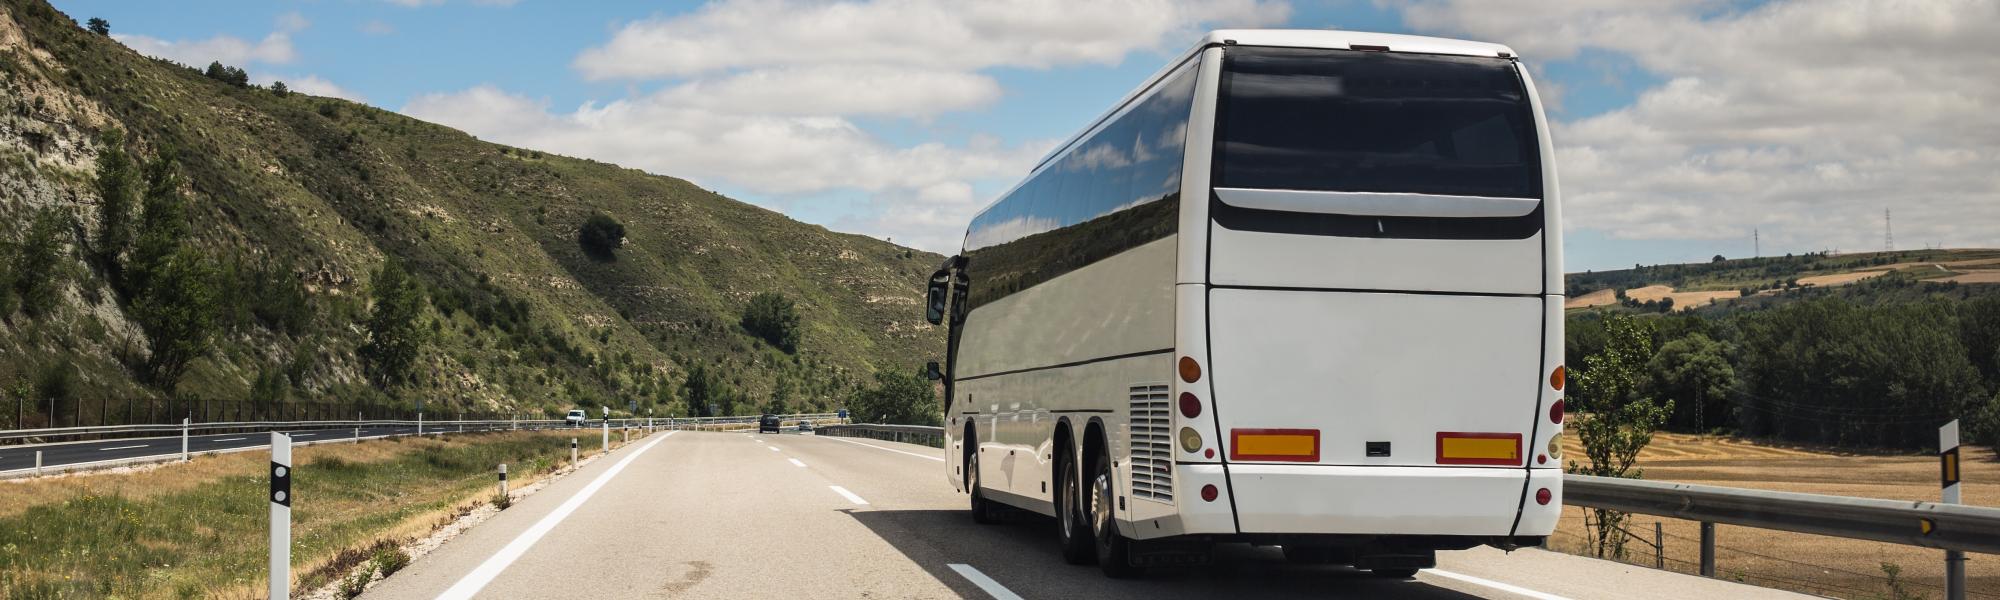 Spanish road transport faces 20% shortfall in drivers